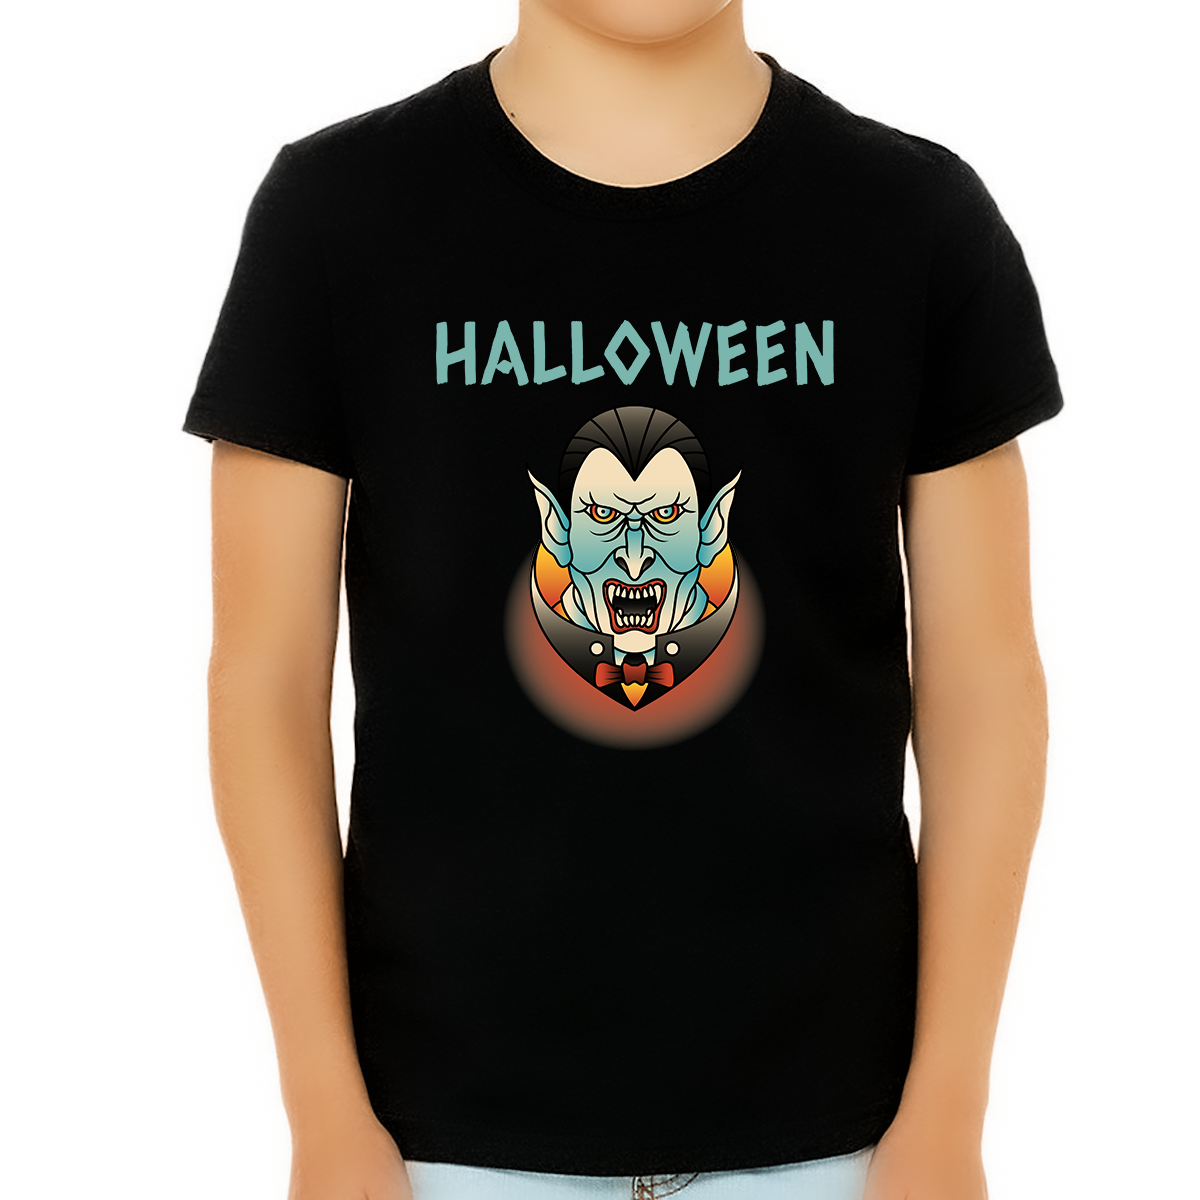 Mad Dracula Halloween Shirts for Boys Count Dracula Shirt Halloween Tshirts Boys Halloween Shirts for Kids